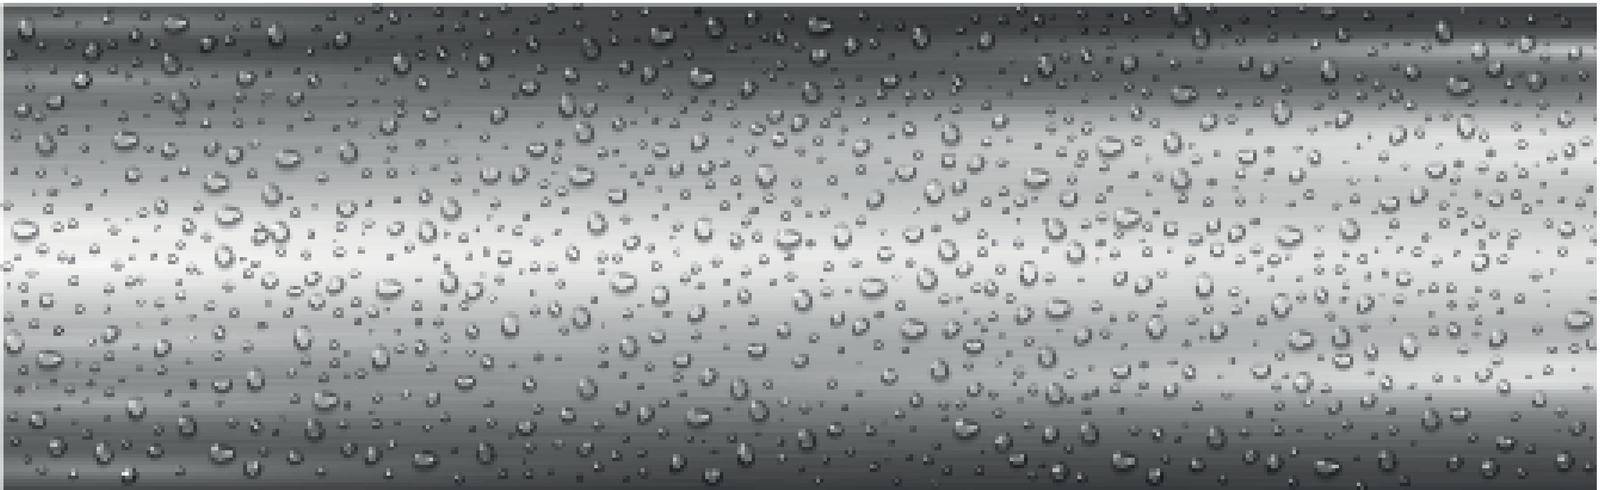 Realistic drops of water on a silver metal background - Vector by BEMPhoto